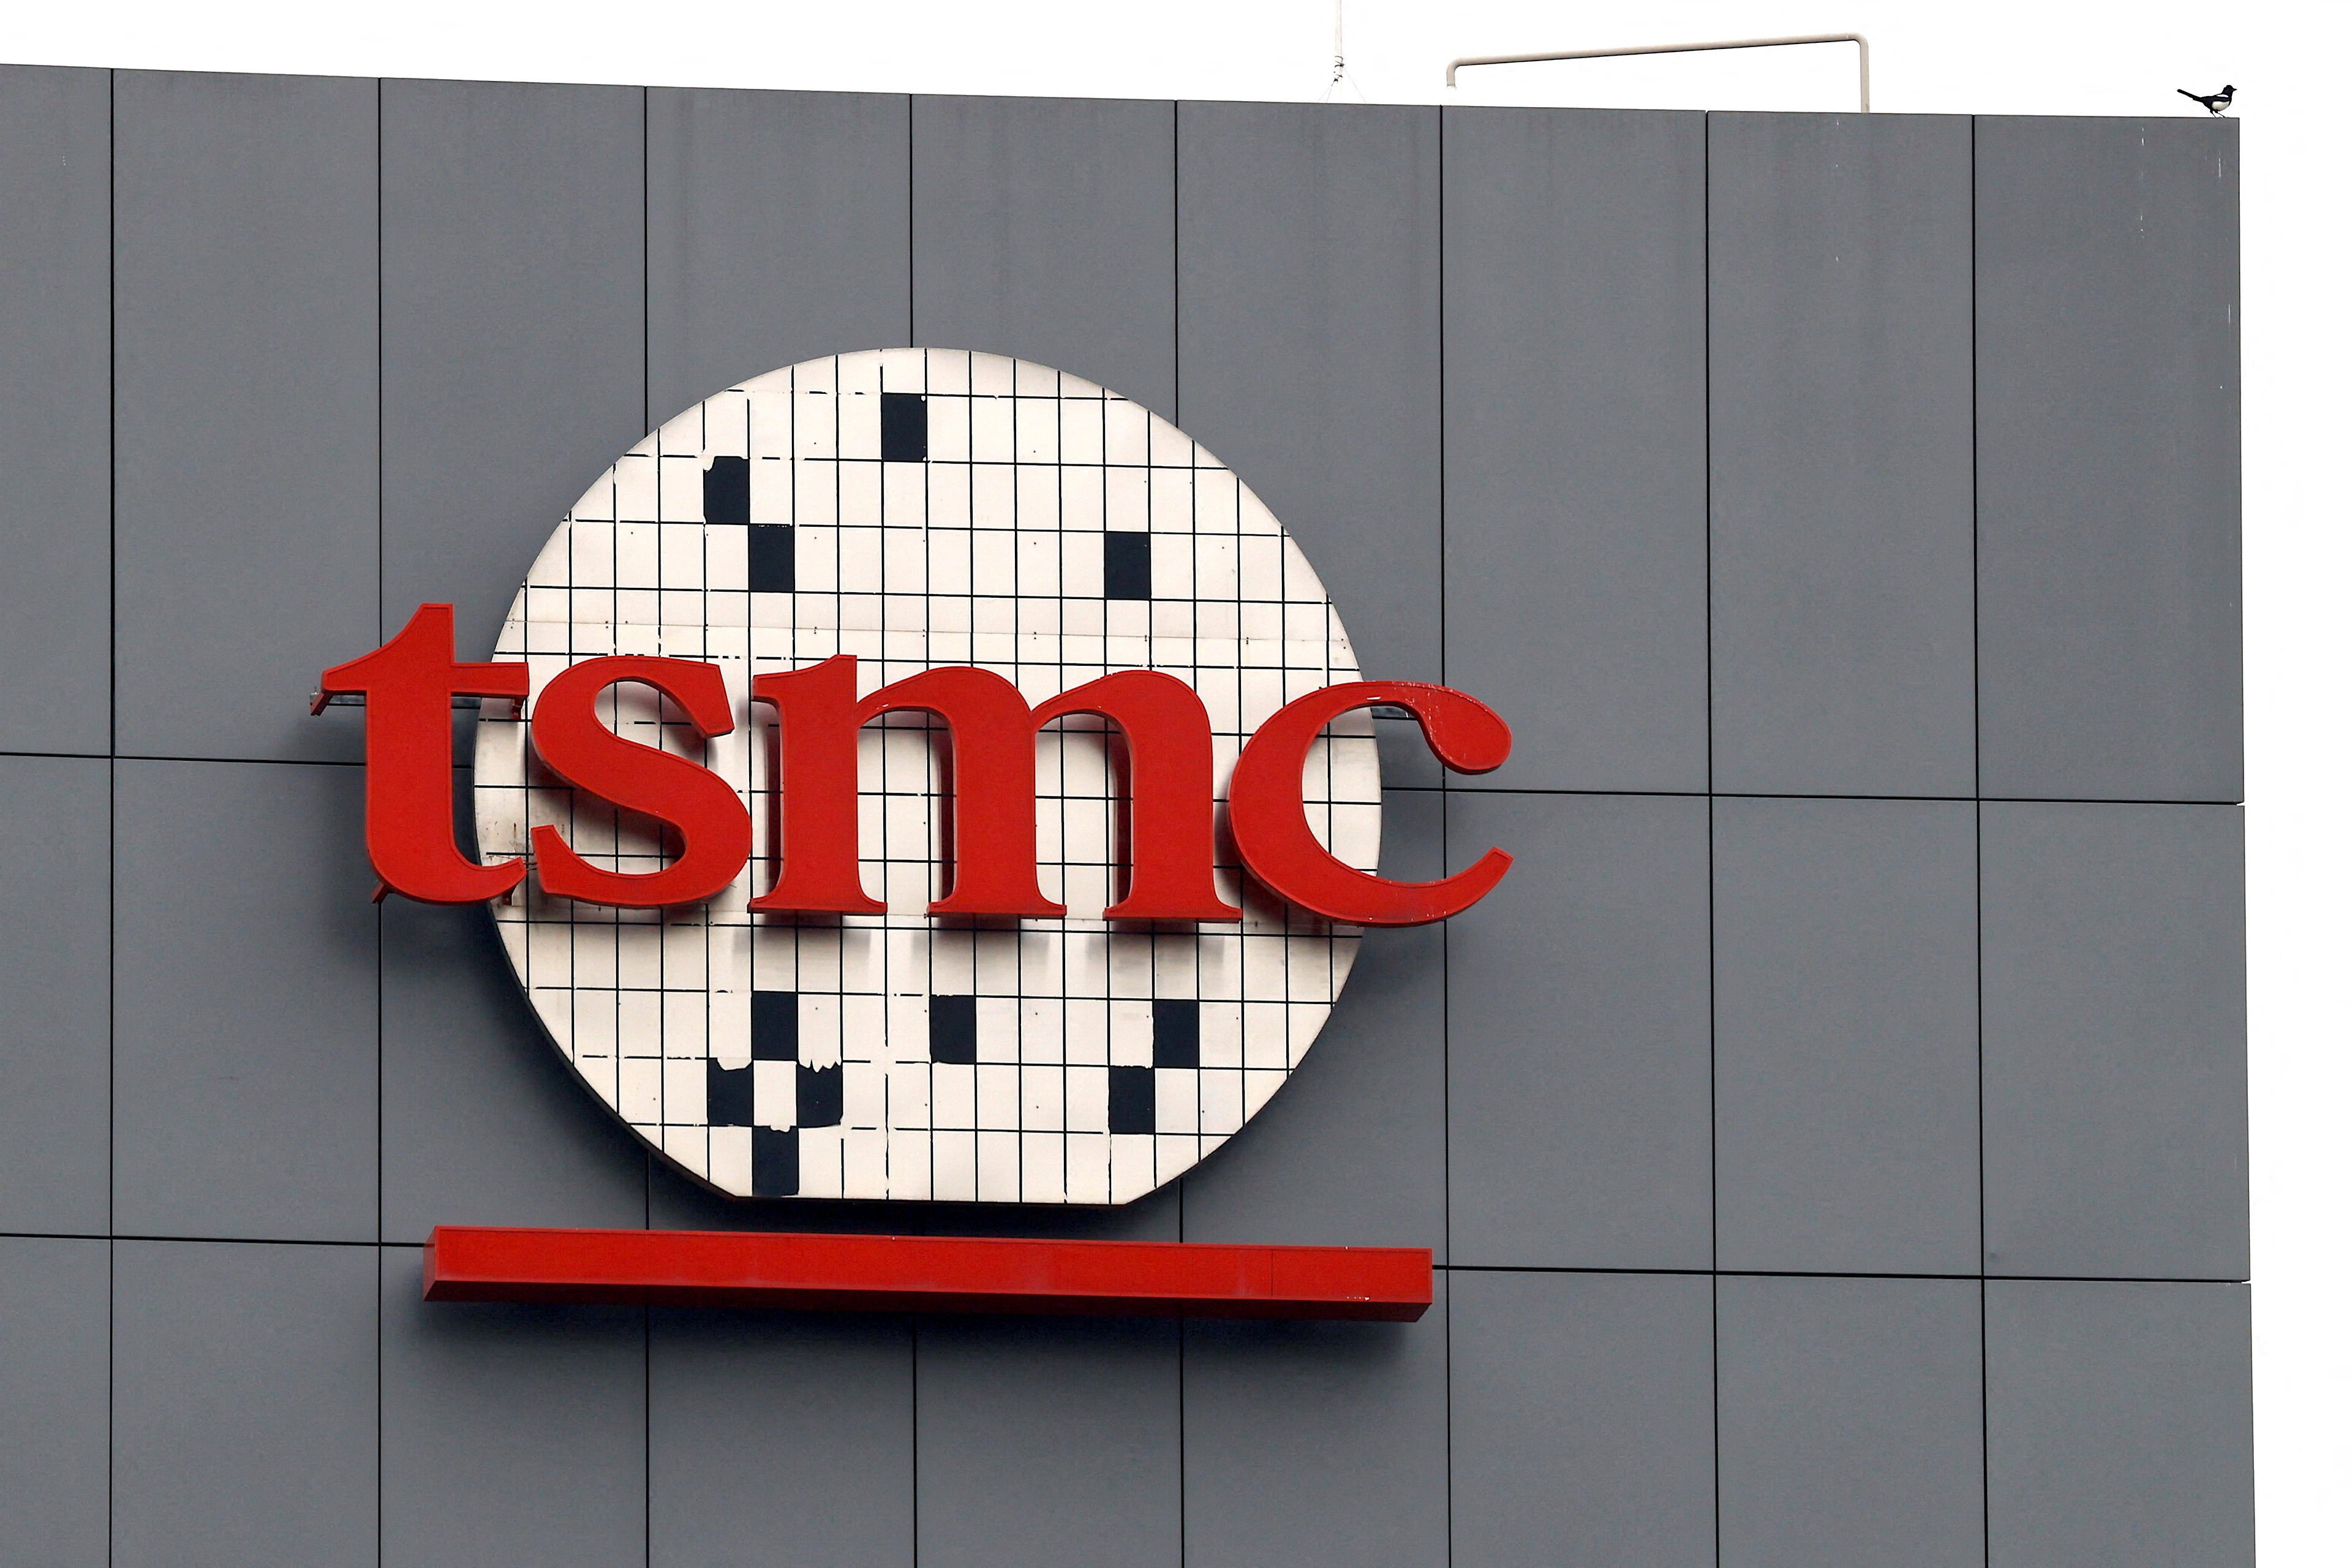 Taiwan Semiconductor Manufacturing Co's logo is seen on the company’s building in Tainan, southern Taiwan, on December 29, 2022. Photo: Reuters